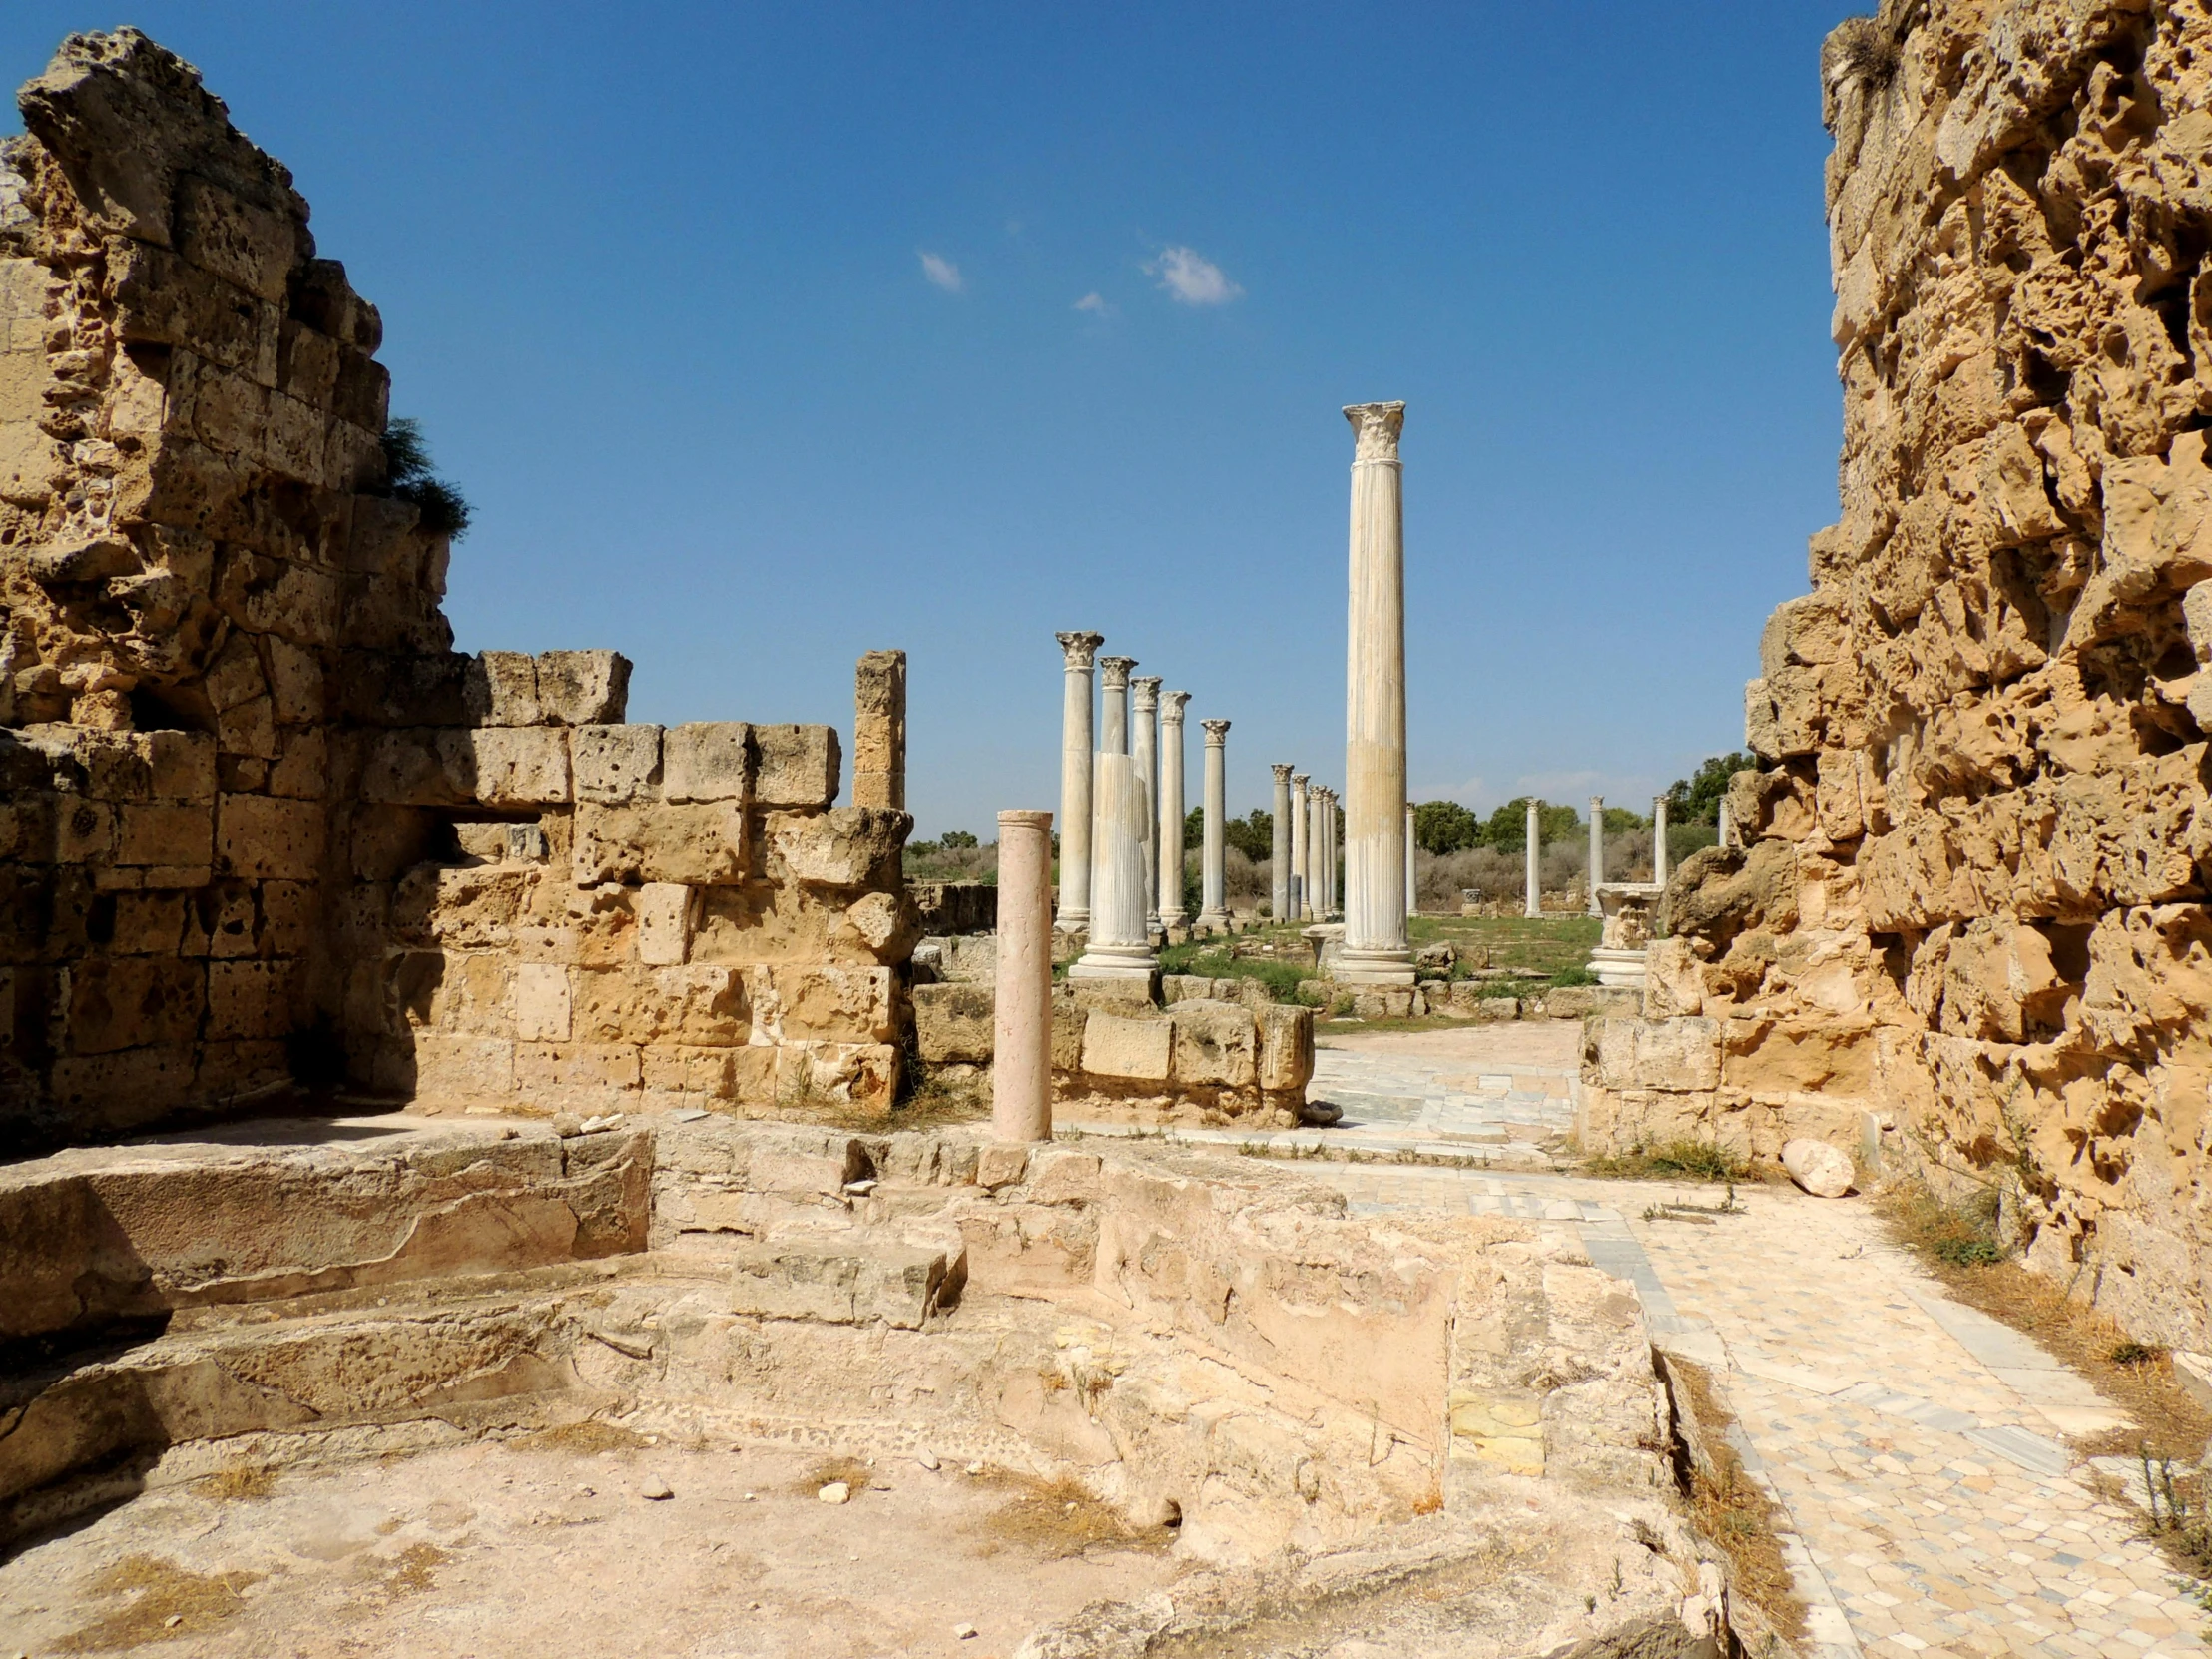 ruins on the side of the road with columns